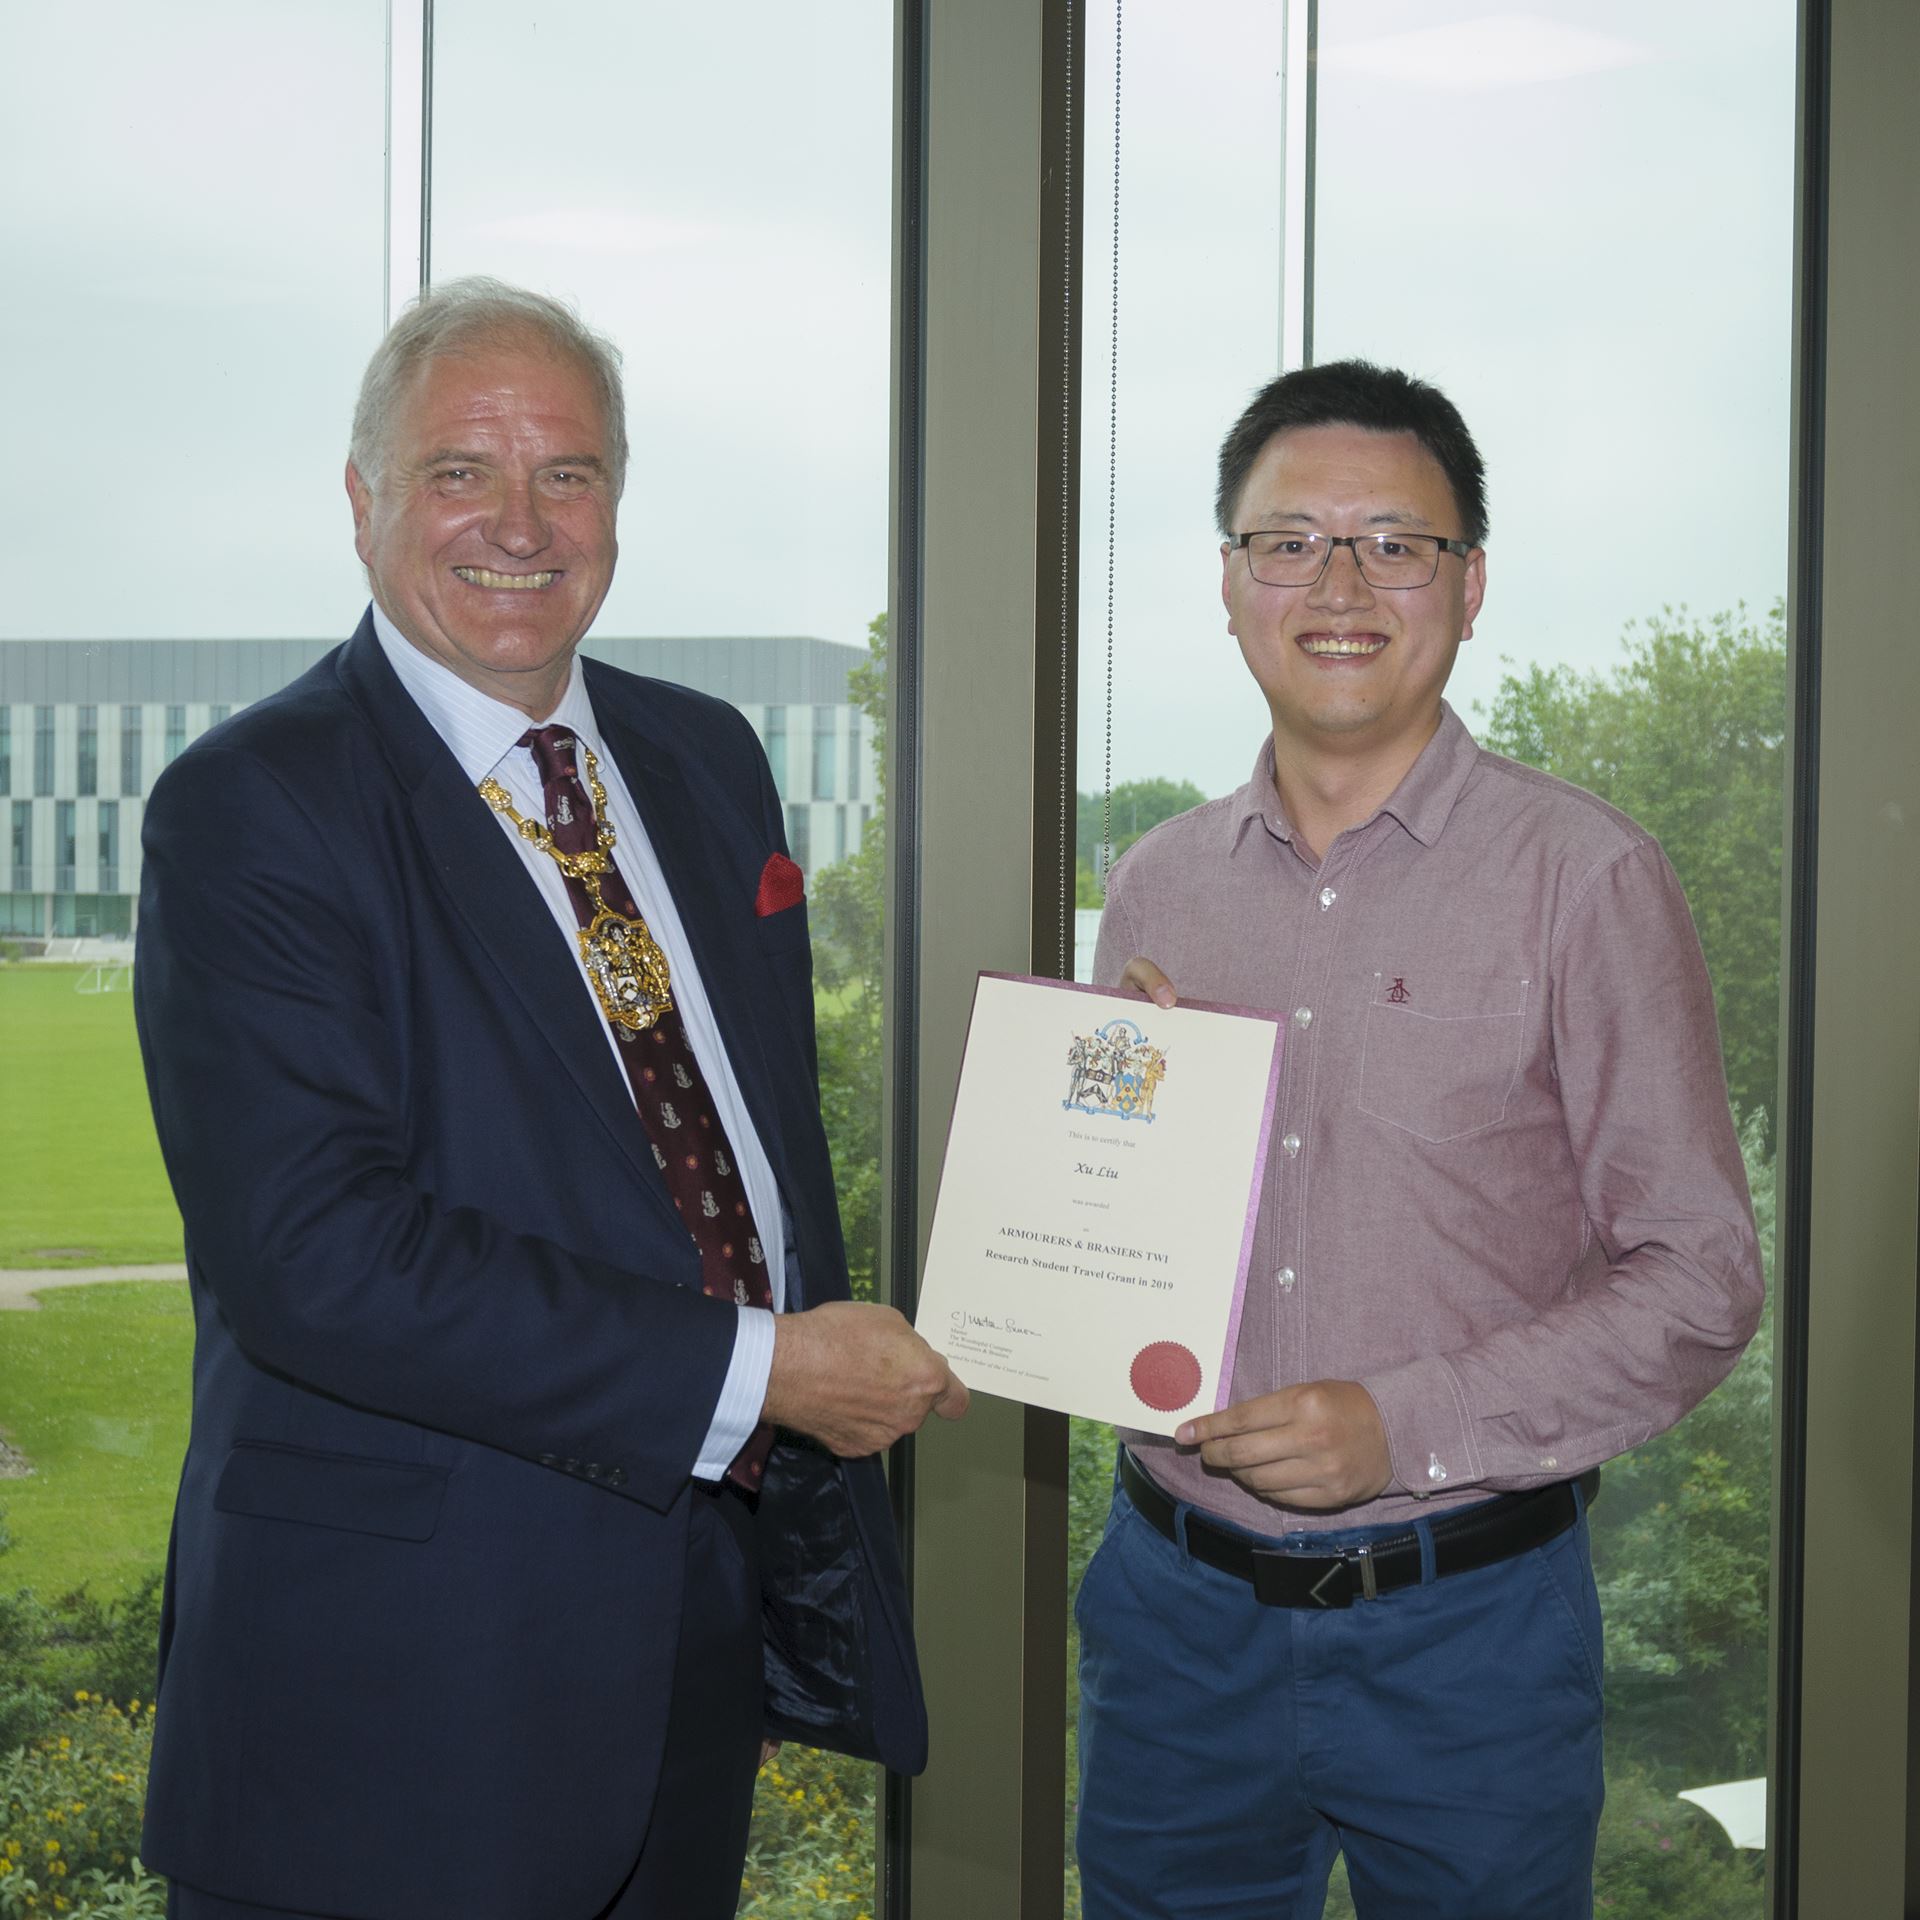 Xu Liu (pictured right) receiving the 2019 Armourers and Brasiers Travel Award 